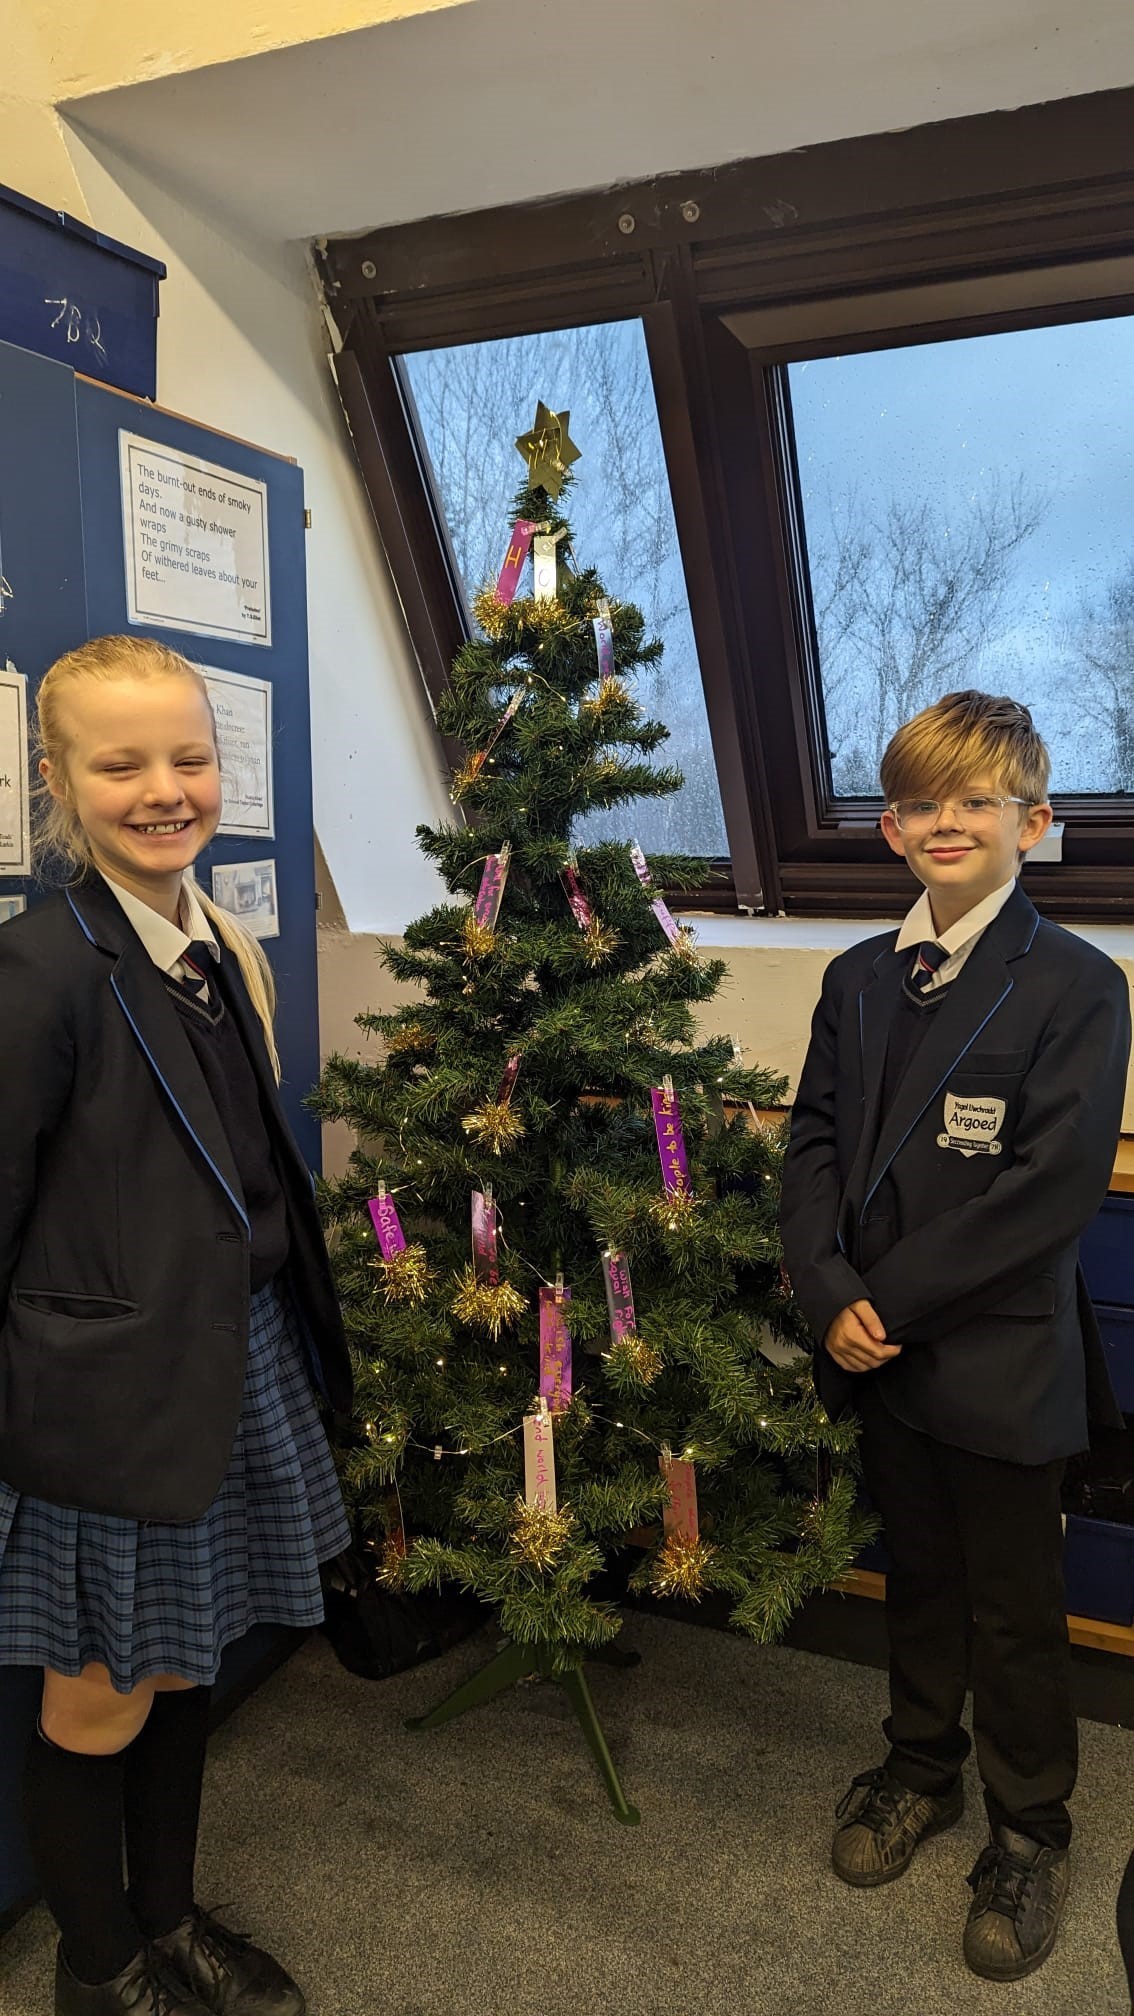 Christmas tree competition winners, Lois Evans and Joe Green, form 7PSH